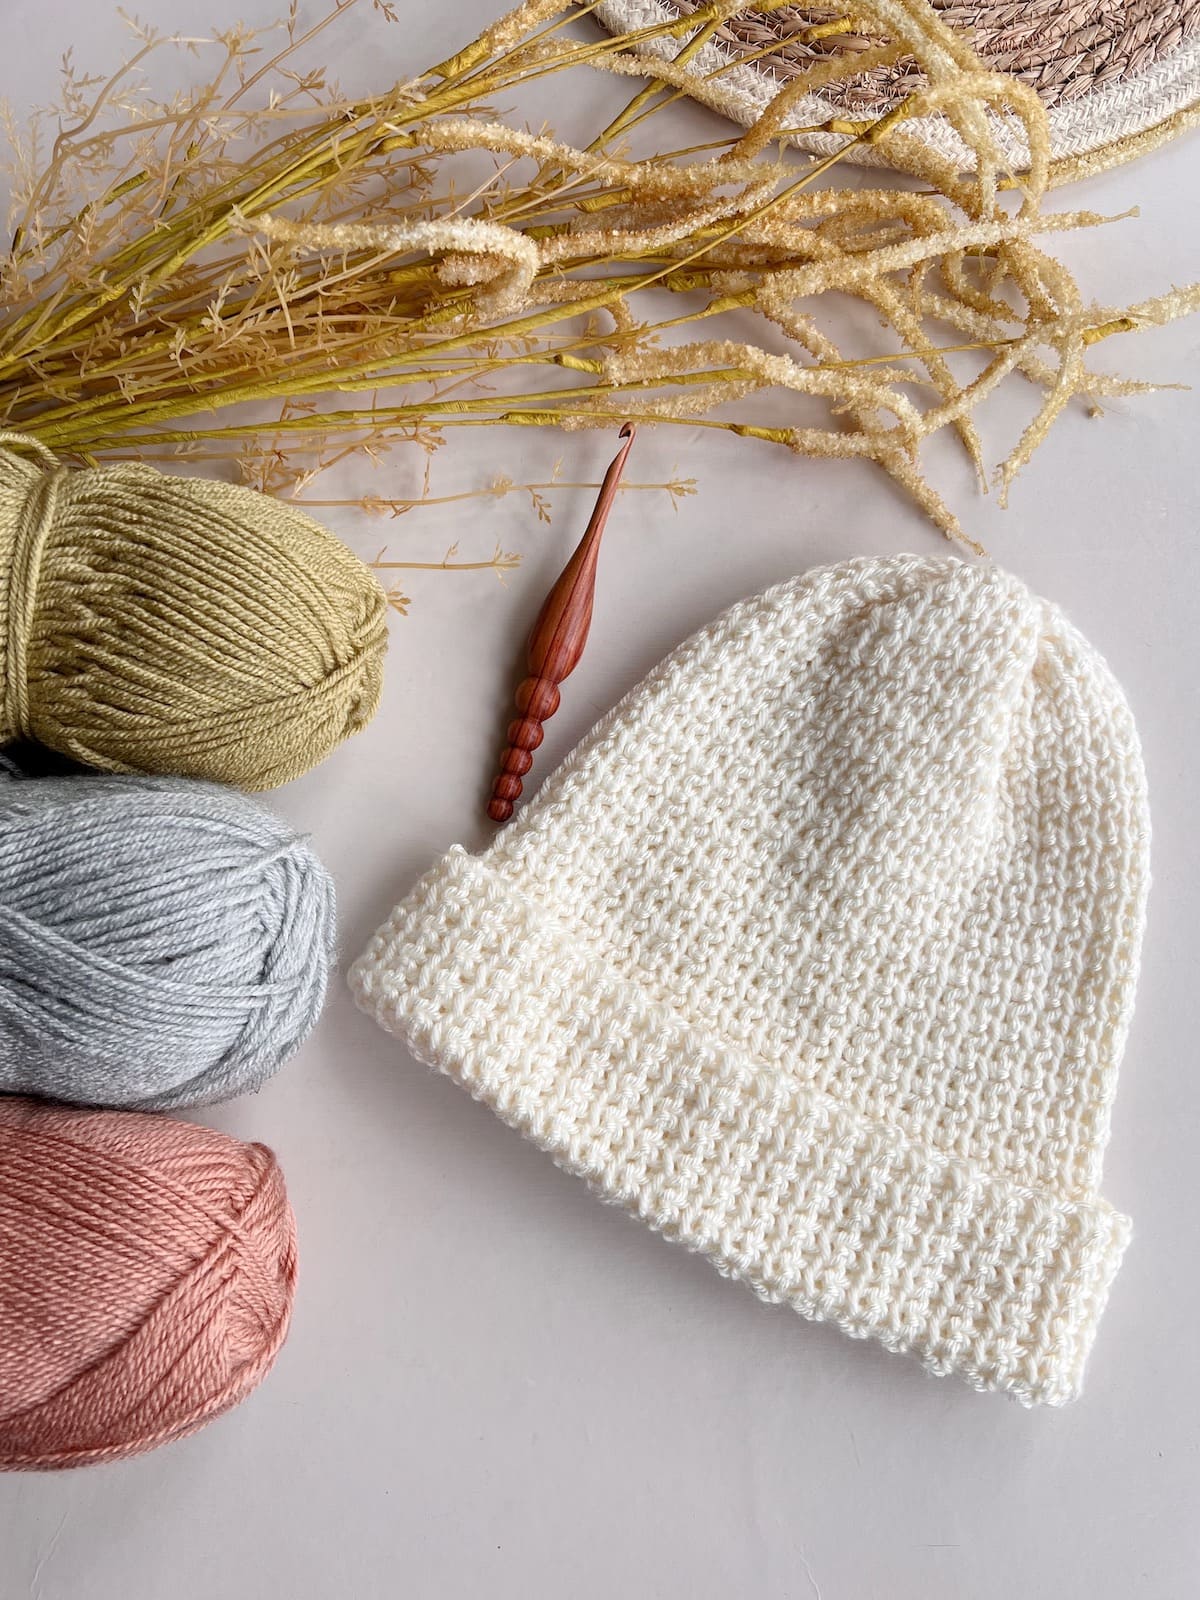 Free crochet beanie pattern in all sizes with crochet hook and balls of yarn.